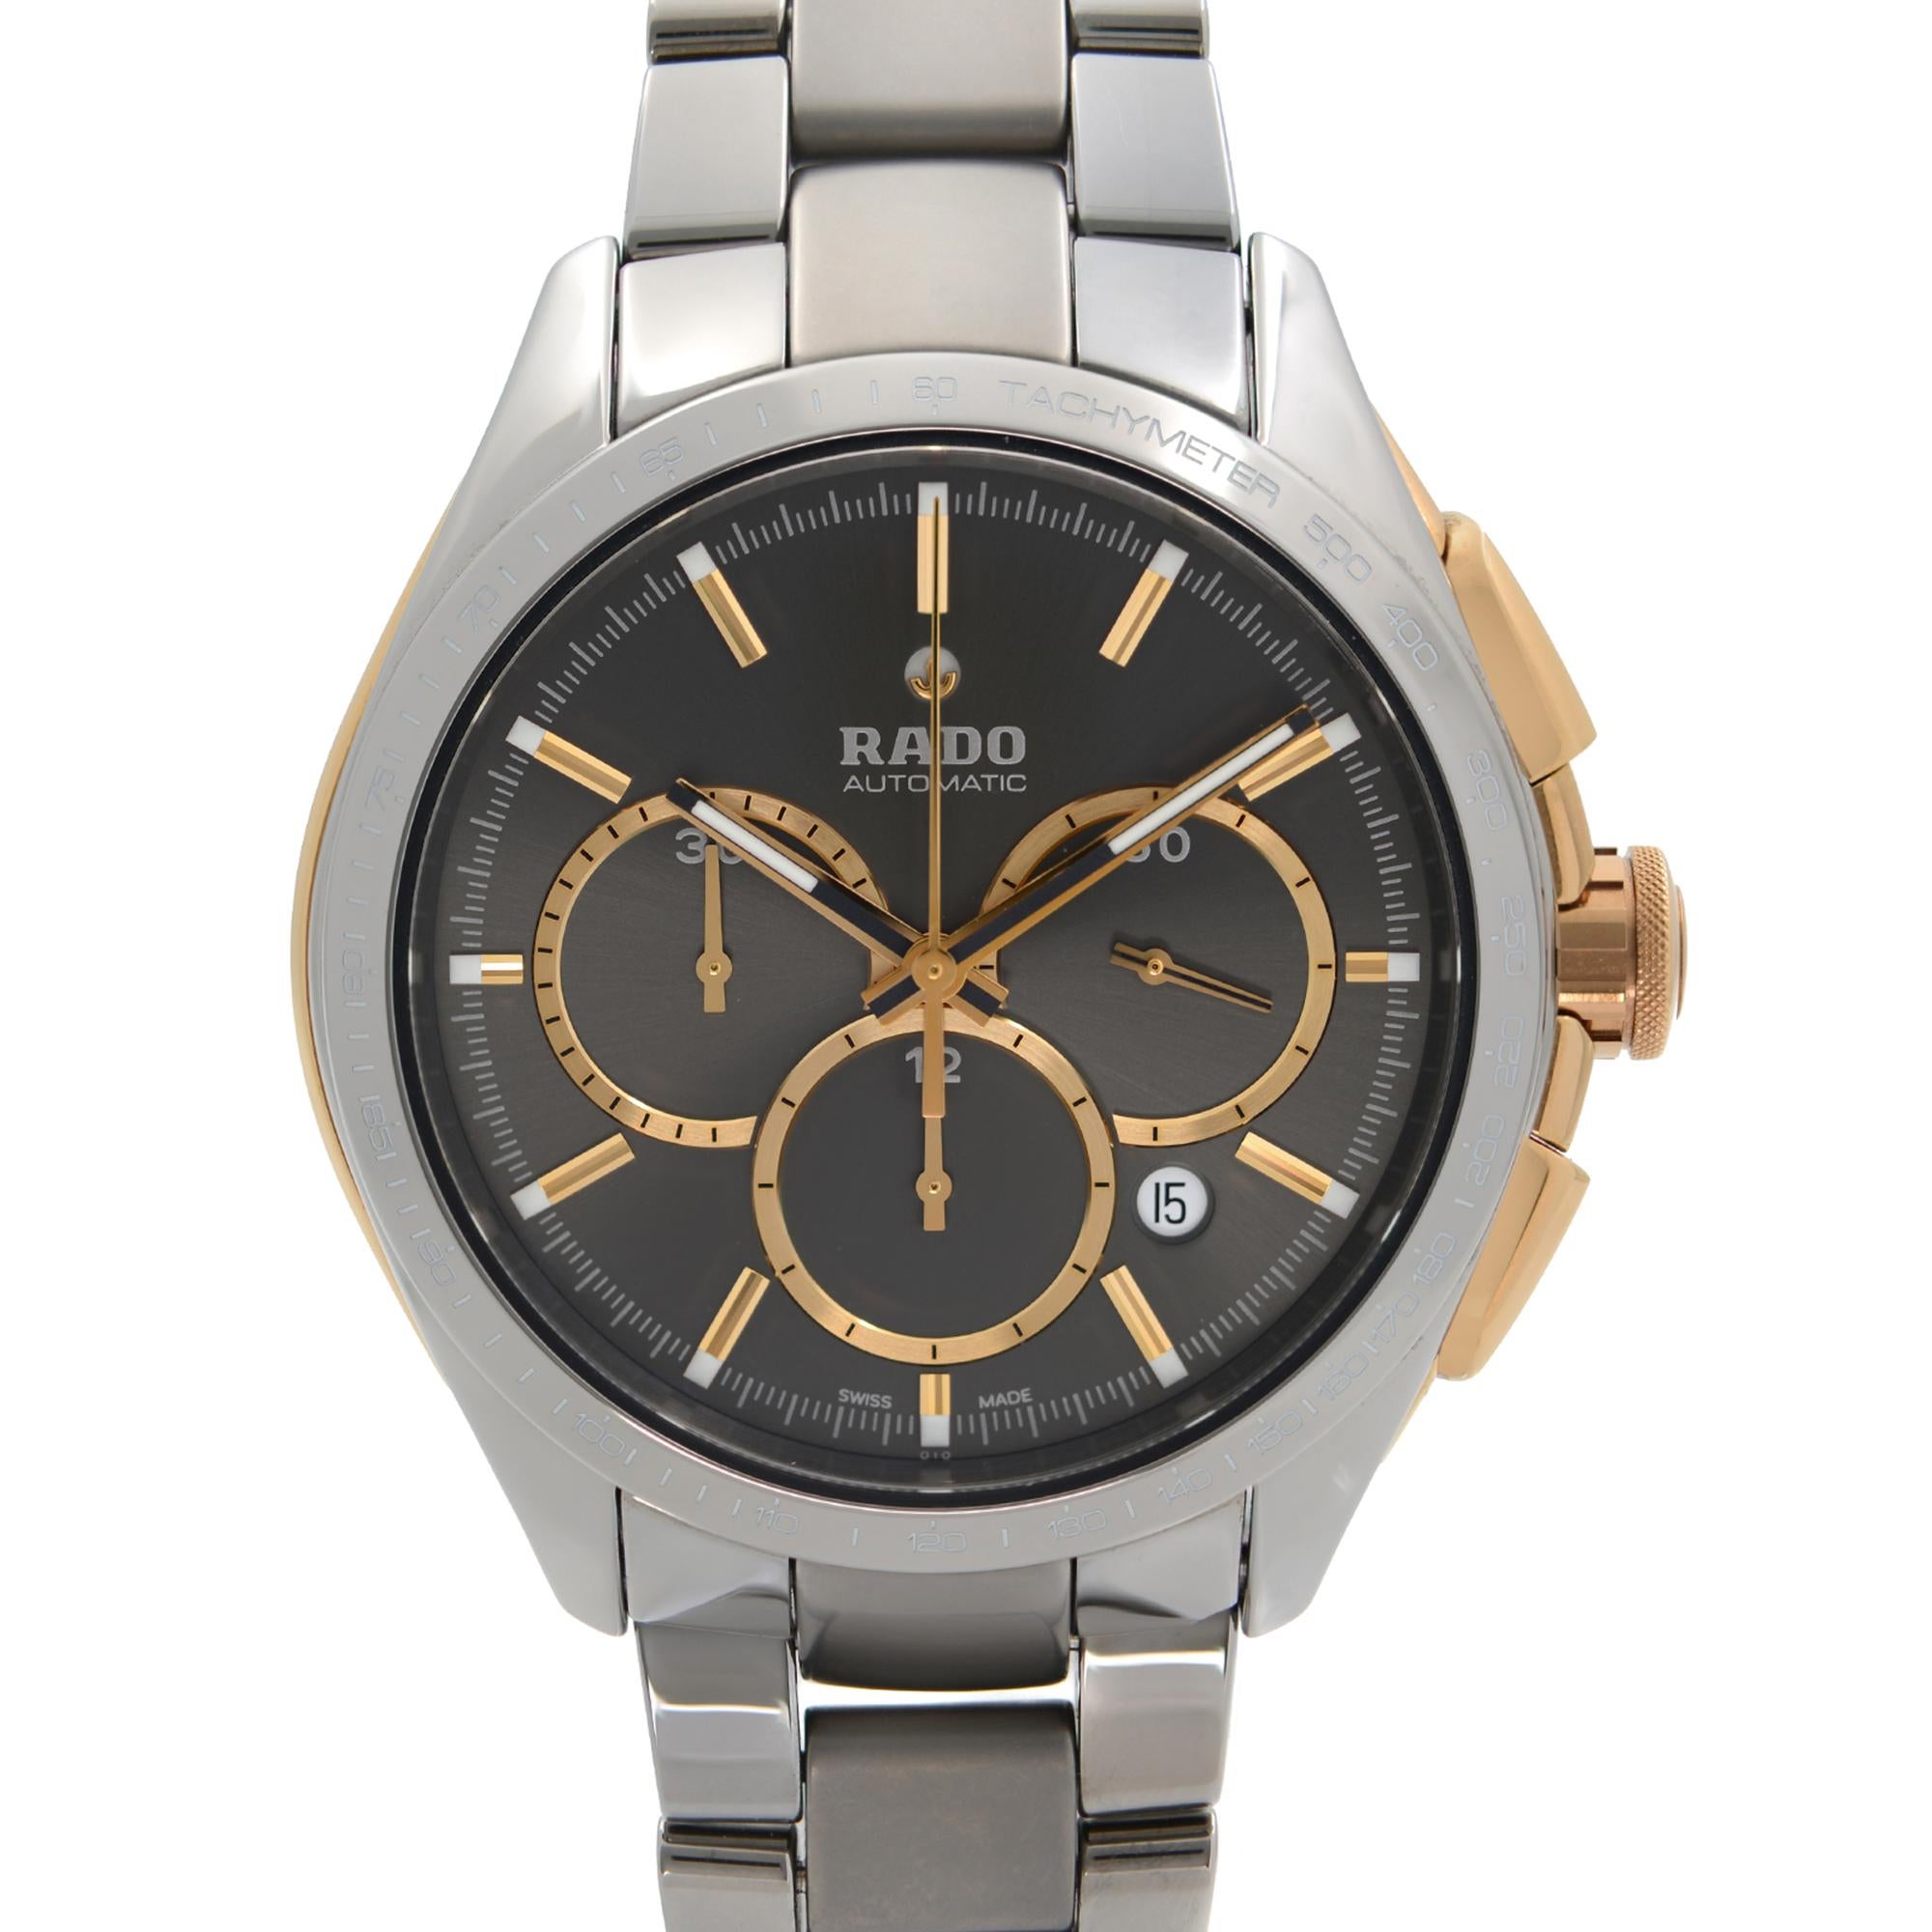 Pre-Owned Rado Hyperchrome Chronograph Grey Dial Men's Automatic Watch R32118102. The Watch Has Tiny Scratches and Chipped End Link by '6' o'clock Lugs. No Original Box and Papers are Included. Comes with Chronostore Presentation Box and